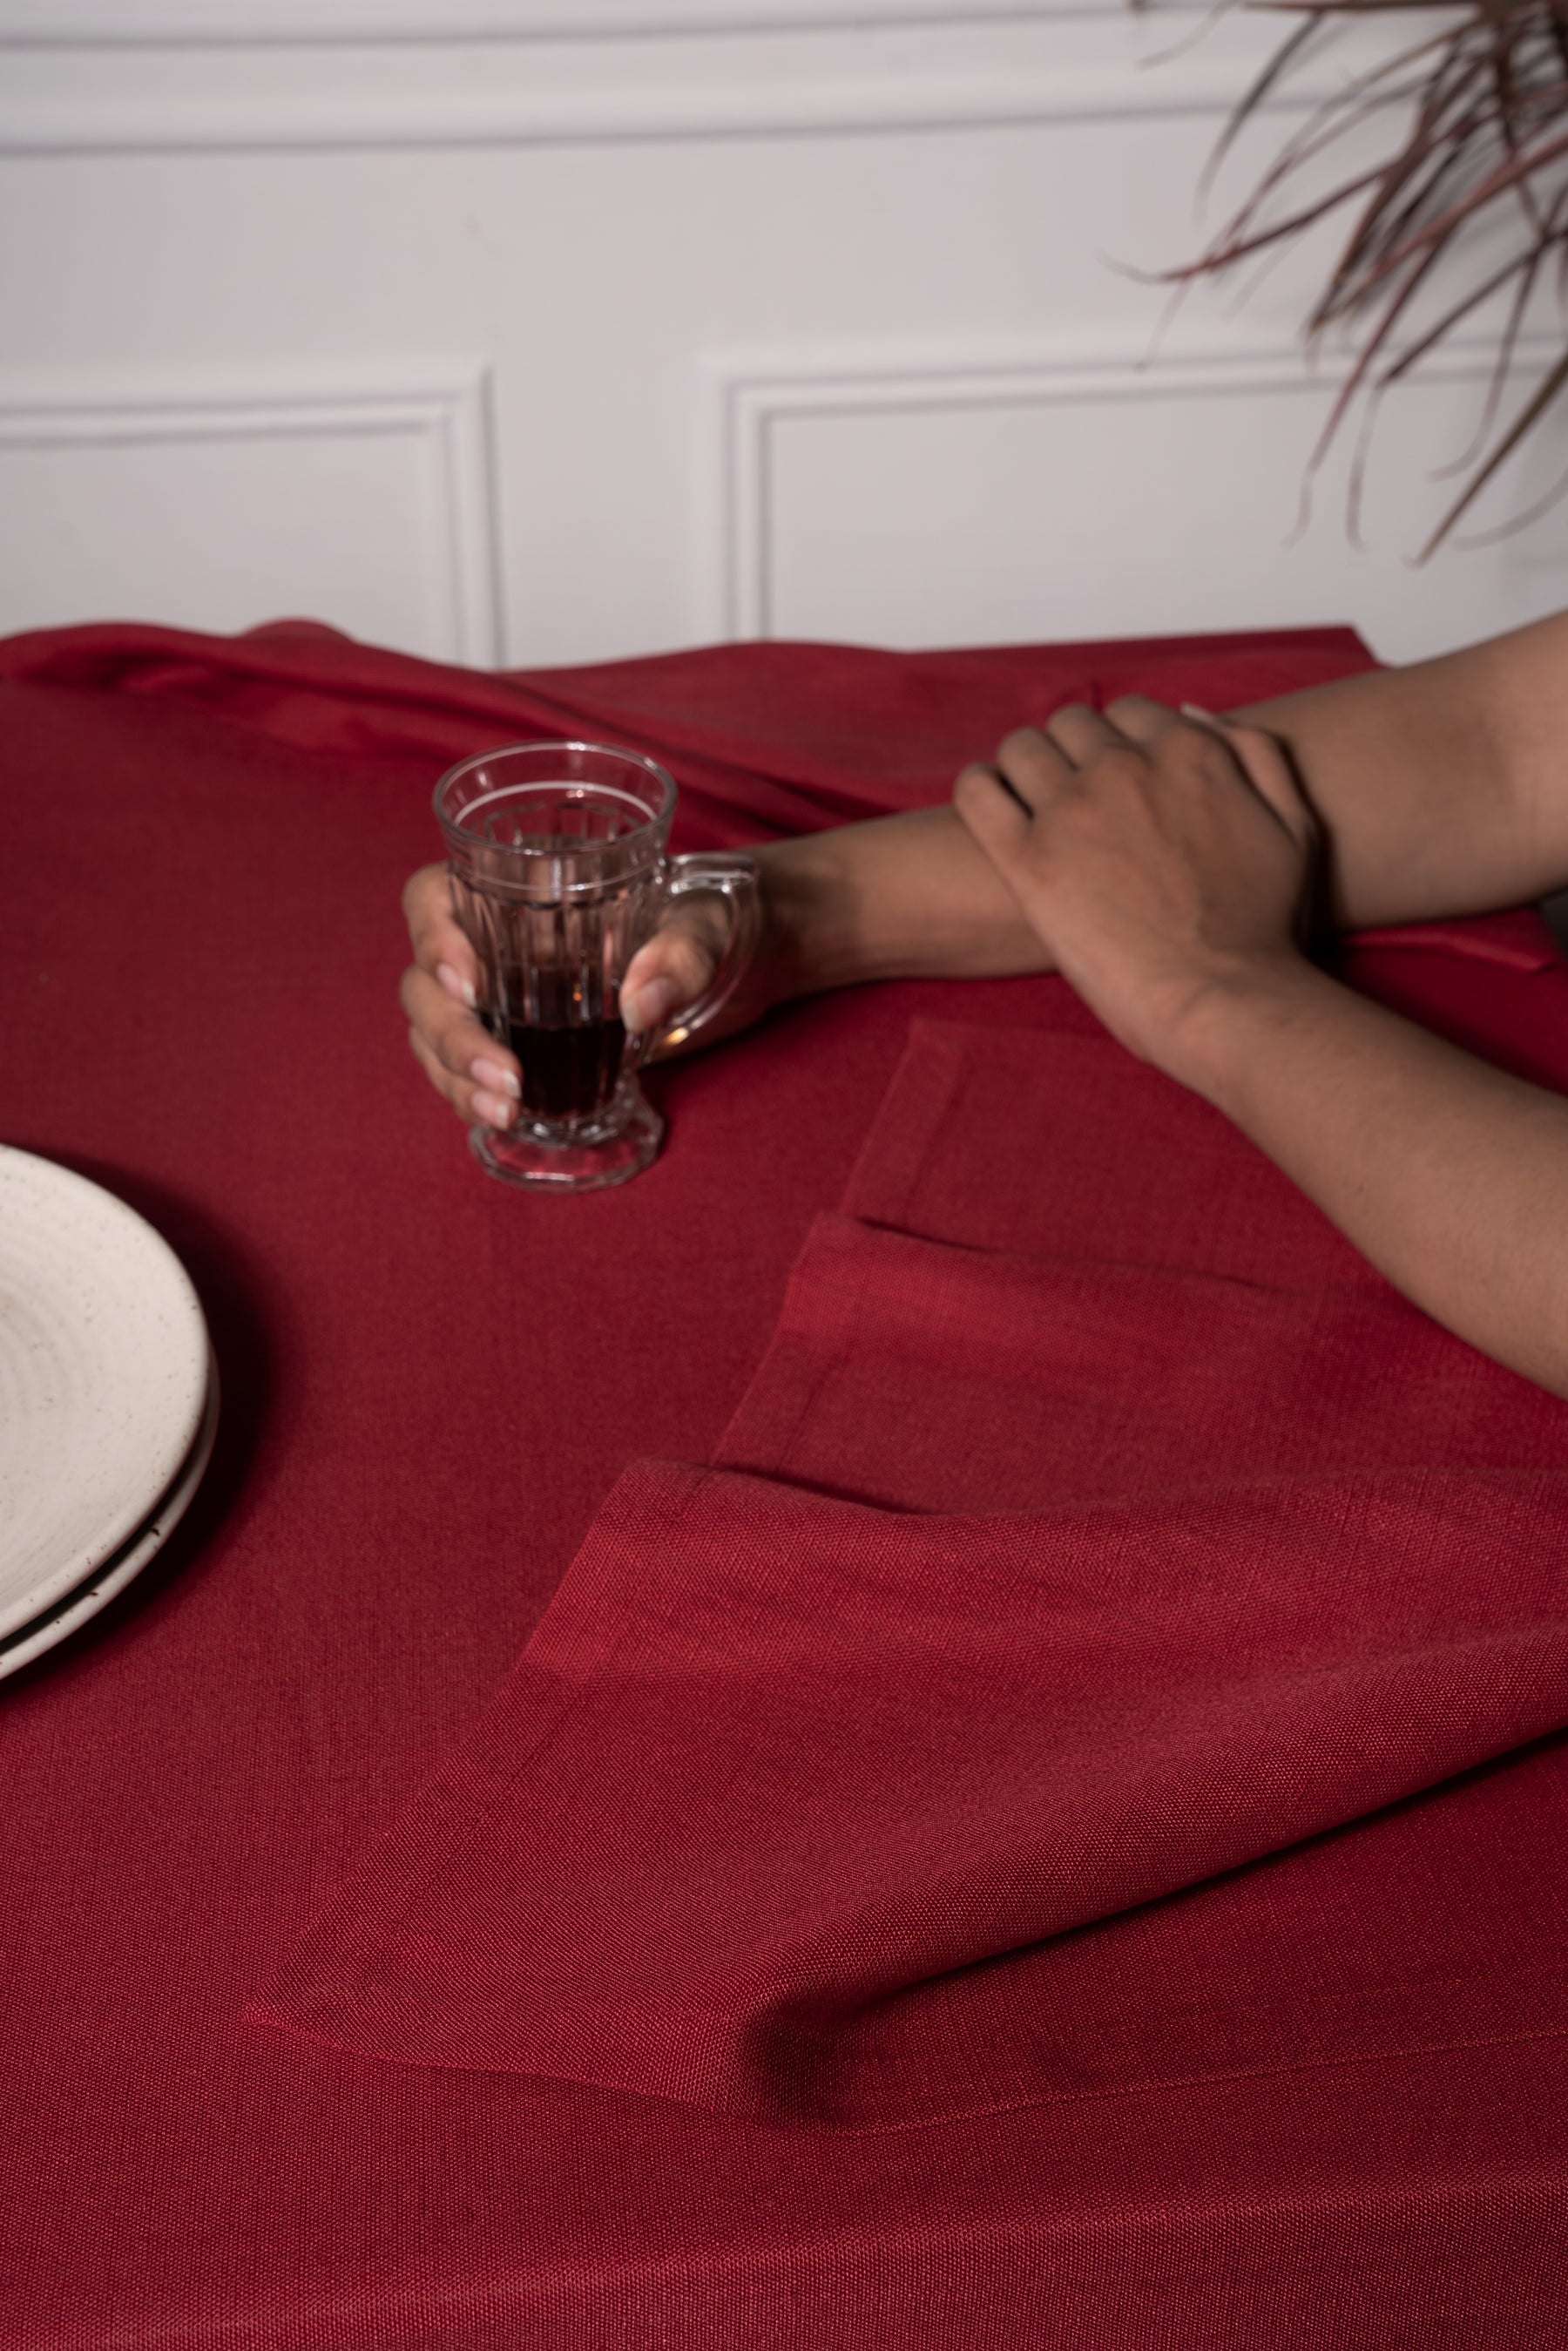 Red Linen Textured Tablecloth - Mitered Corner